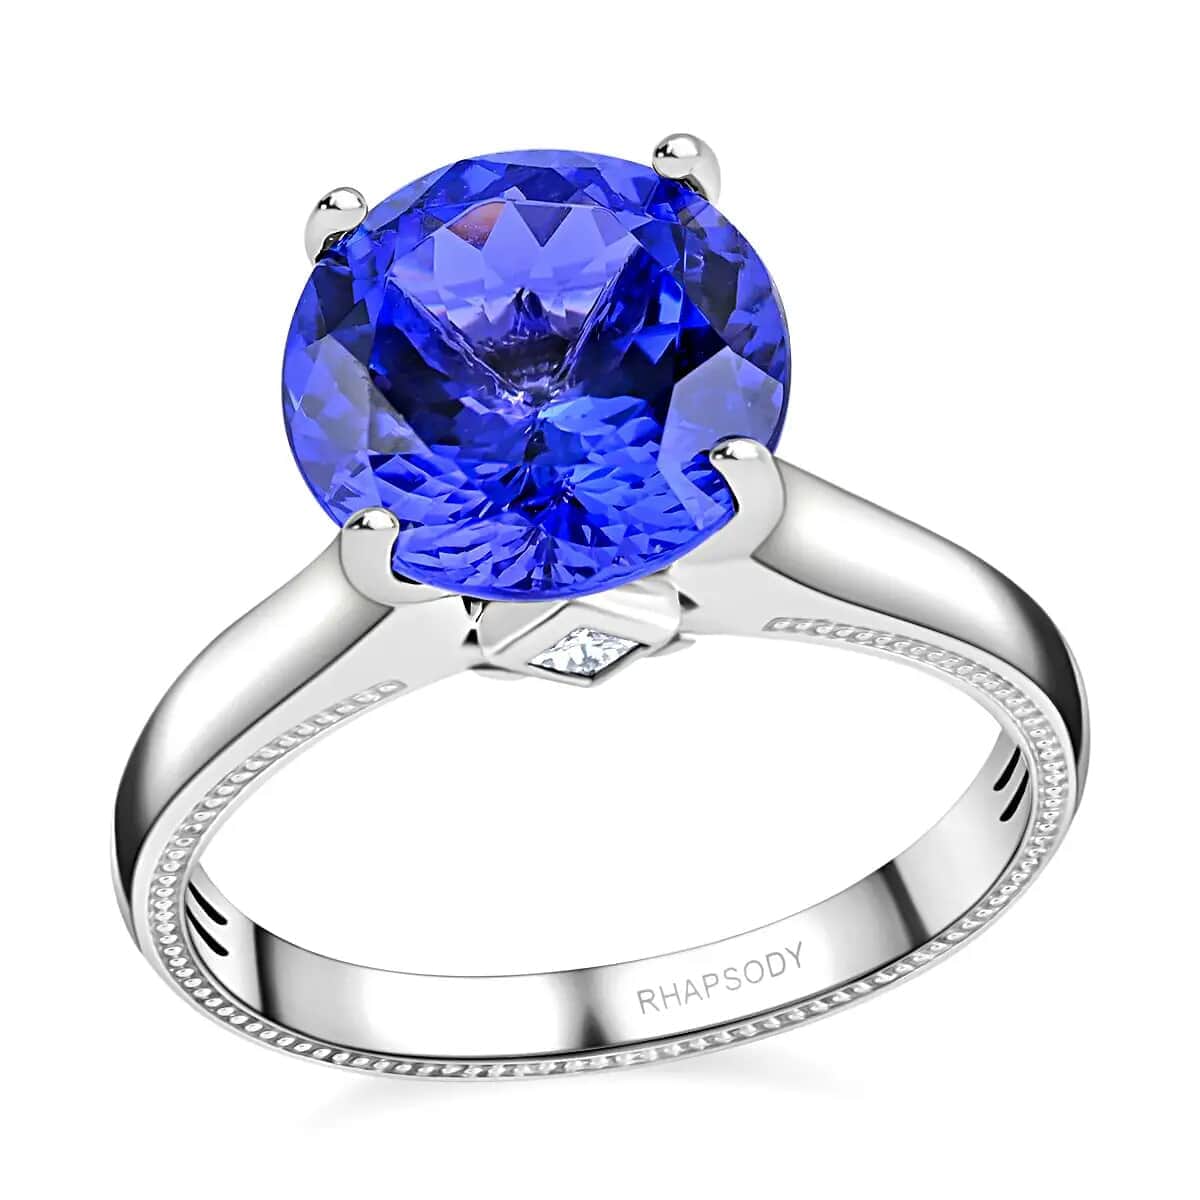 Certified Rhapsody 950 Platinum AAAA Tanzanite and E-F VS Diamond Ring 5.90 Grams 4.25 ctw (Del. in 10-12 Days) image number 0